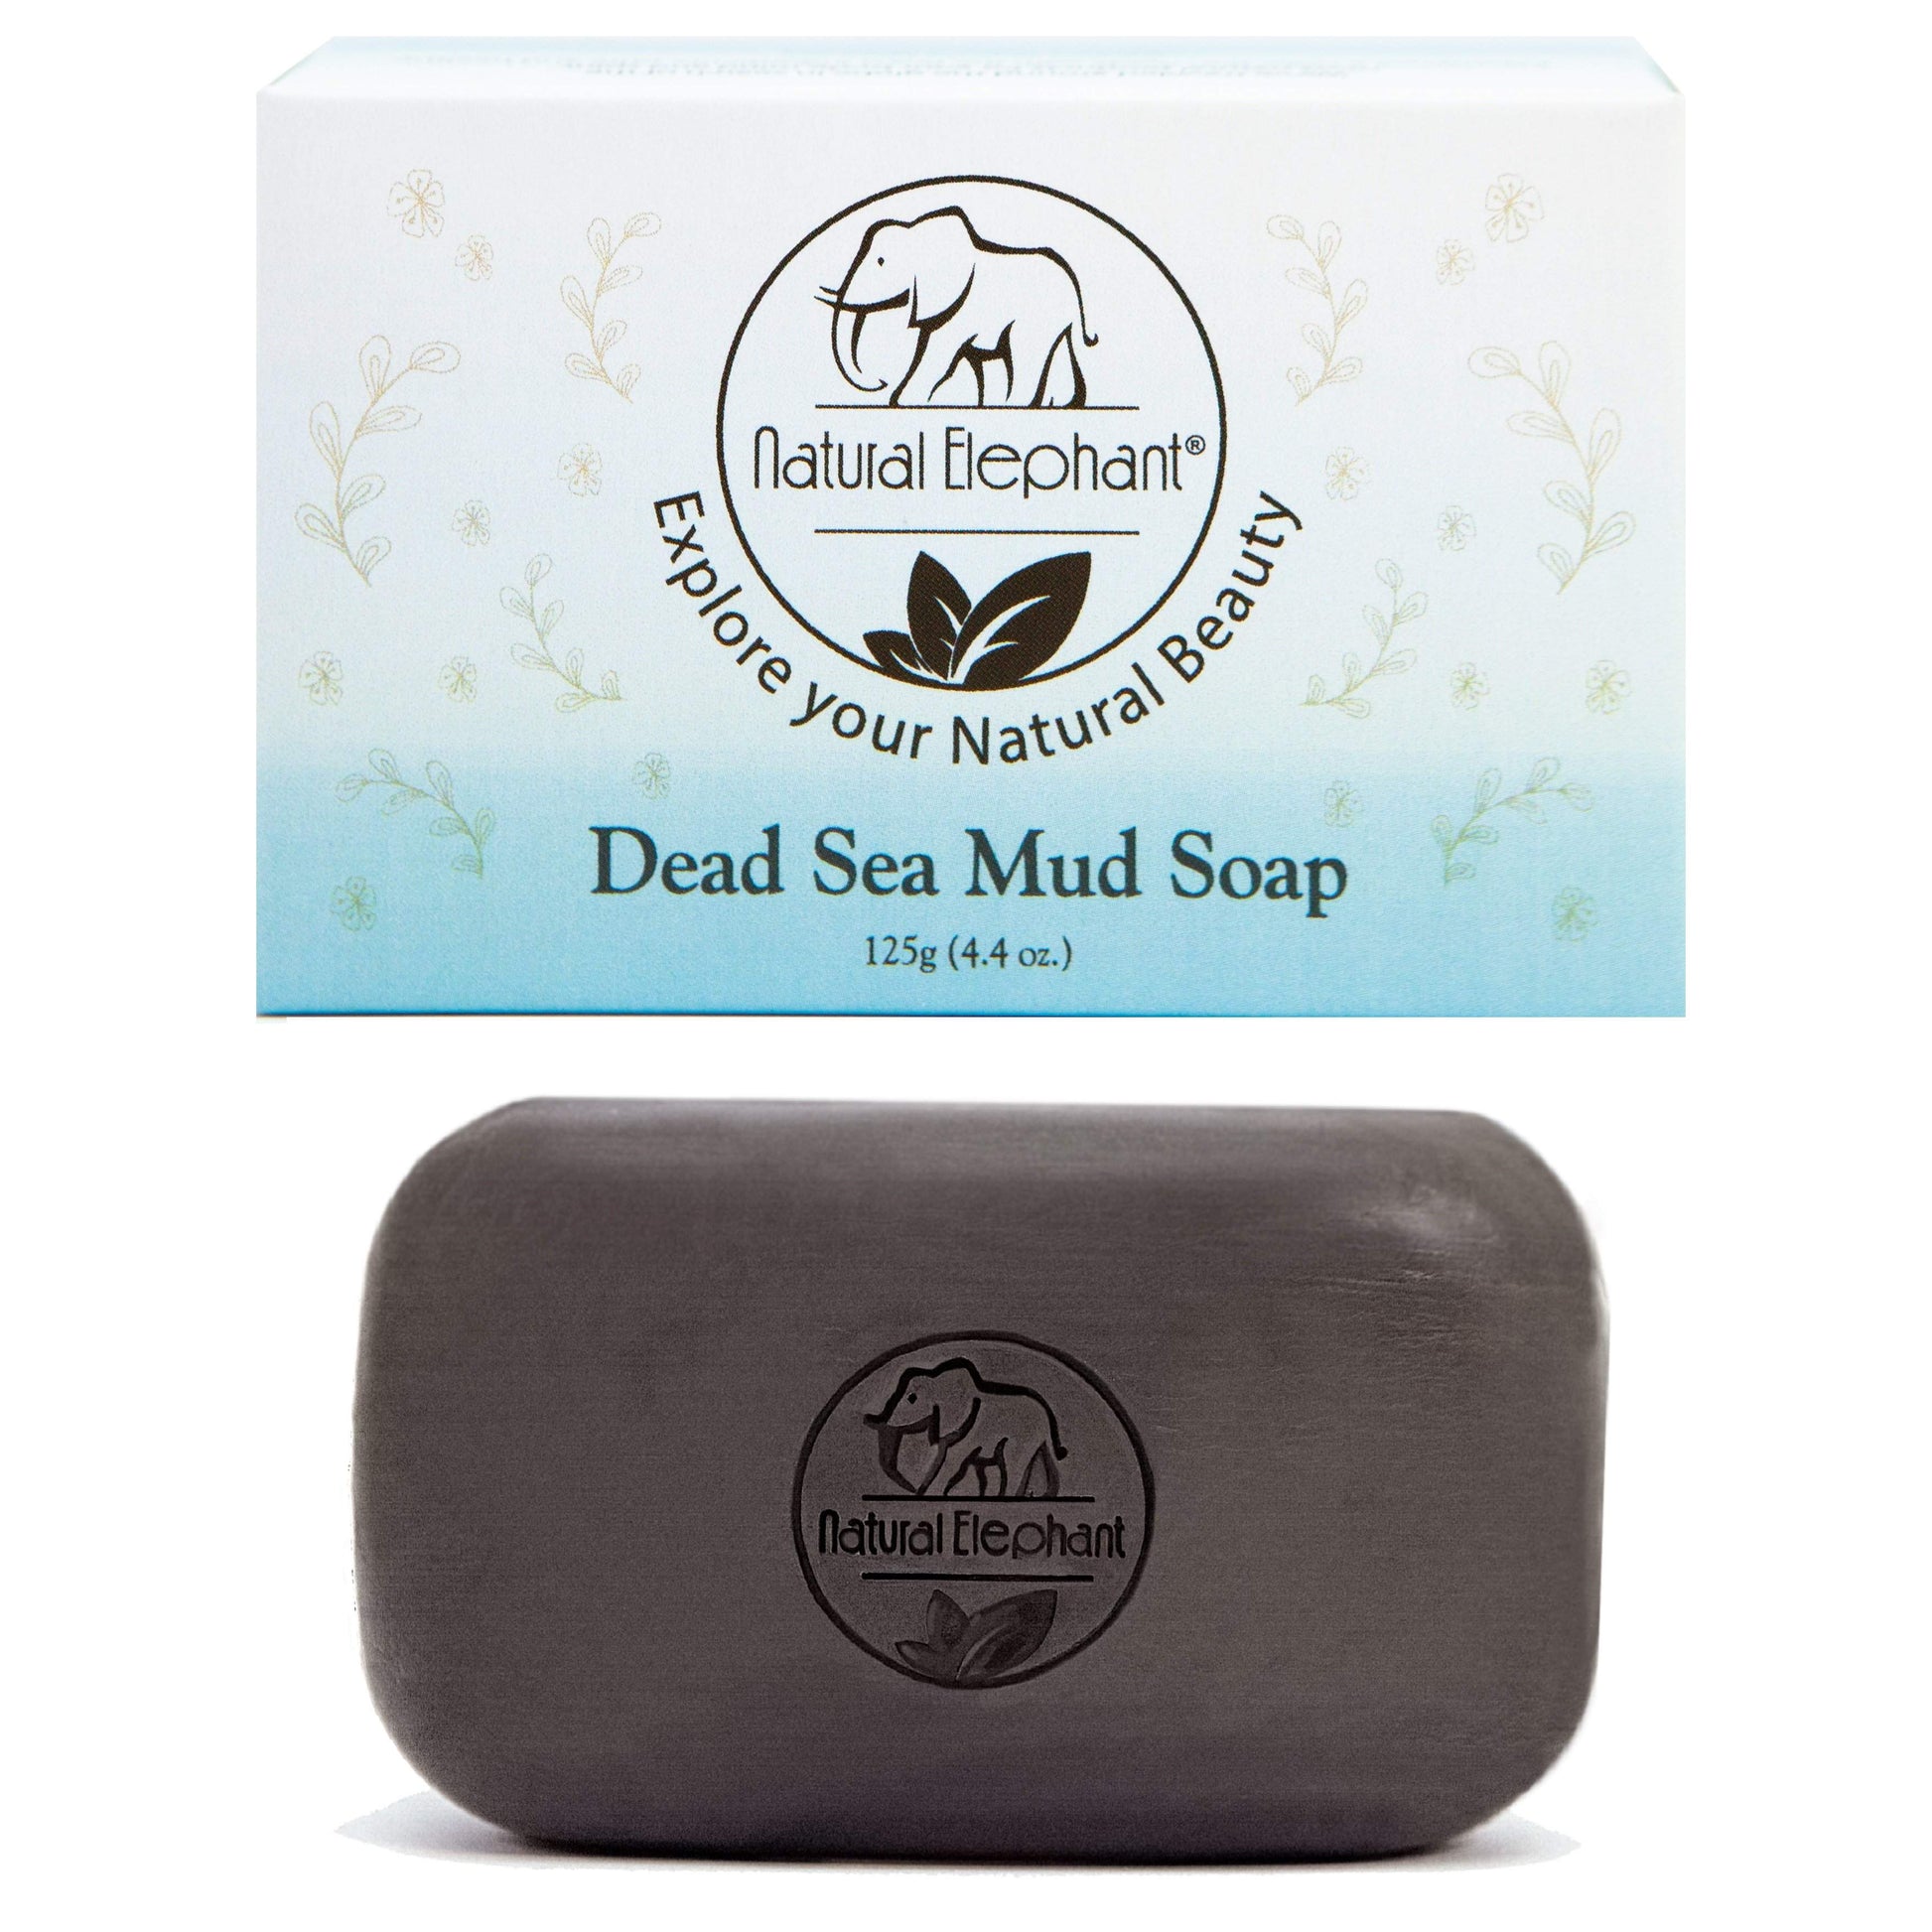 Natural Elephant Dead Sea Mud Soap 4.4 oz (125 g)-Natural Elephant-BB_Bath and Shower,BB_Scrubs and Exfoliators,BB_Soap Bars,Brand_Natural Elephant,Collection_Bath and Body,Collection_Skincare,Concern_Acne & Blemishes,Concern_Combination Skin,Concern_Dry Skin,Concern_Large Pores,Concern_Psoriasis,Concern_Redness,Concern_Sensitive Skin,NATURAL_Dead Sea Collection,Skincare_Cleansers